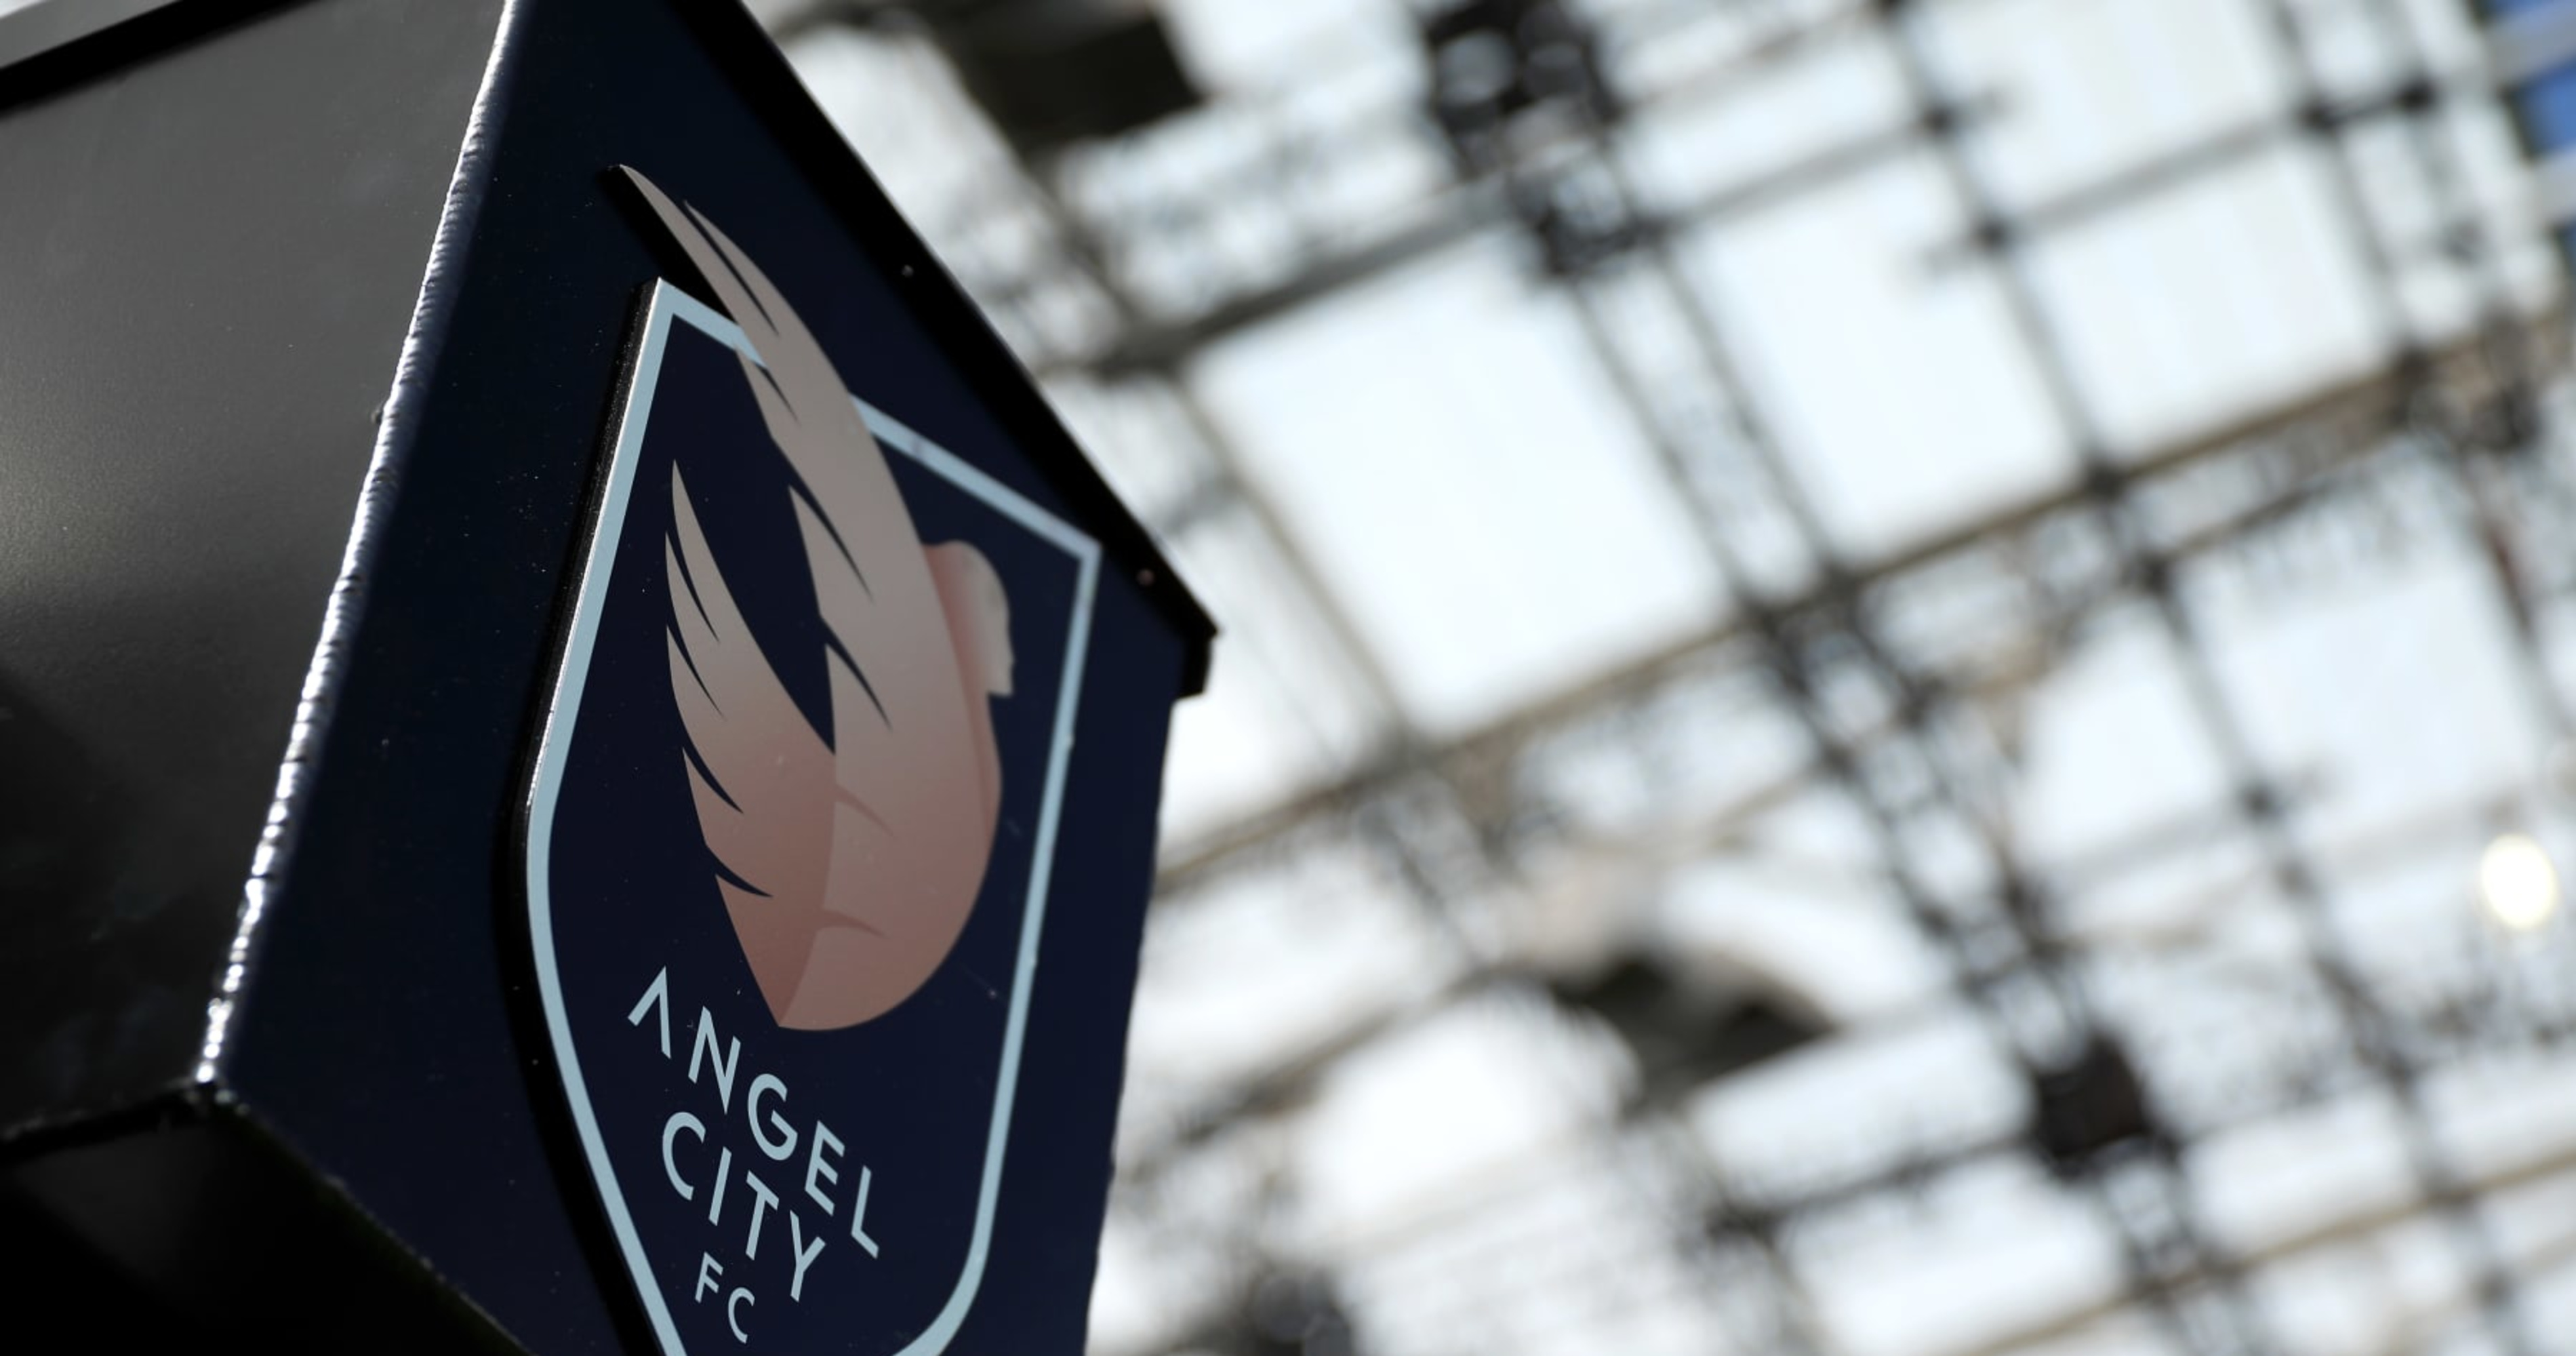 Angel City FC Is World’s Most Valuable Women’s Sports Team After Majority Stake Sold